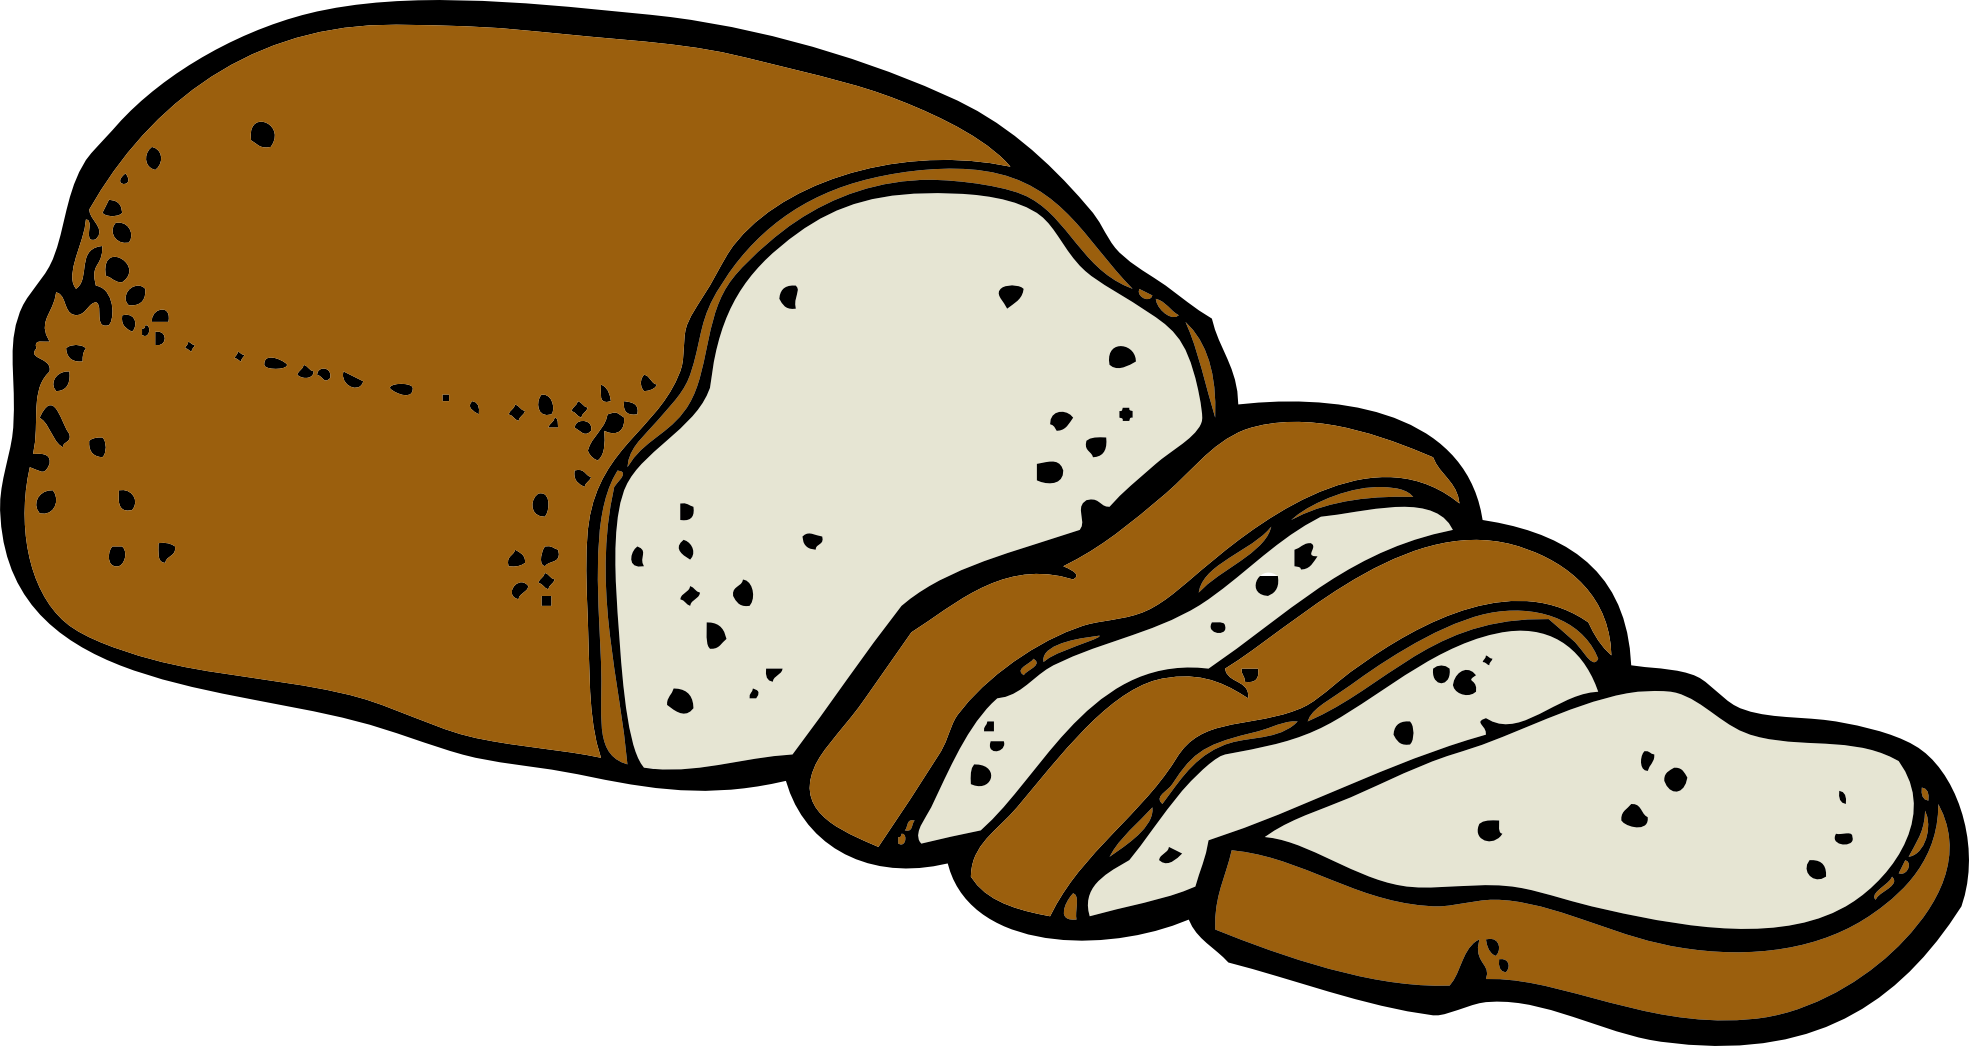 Panda free images breadclipart. Clipart bread